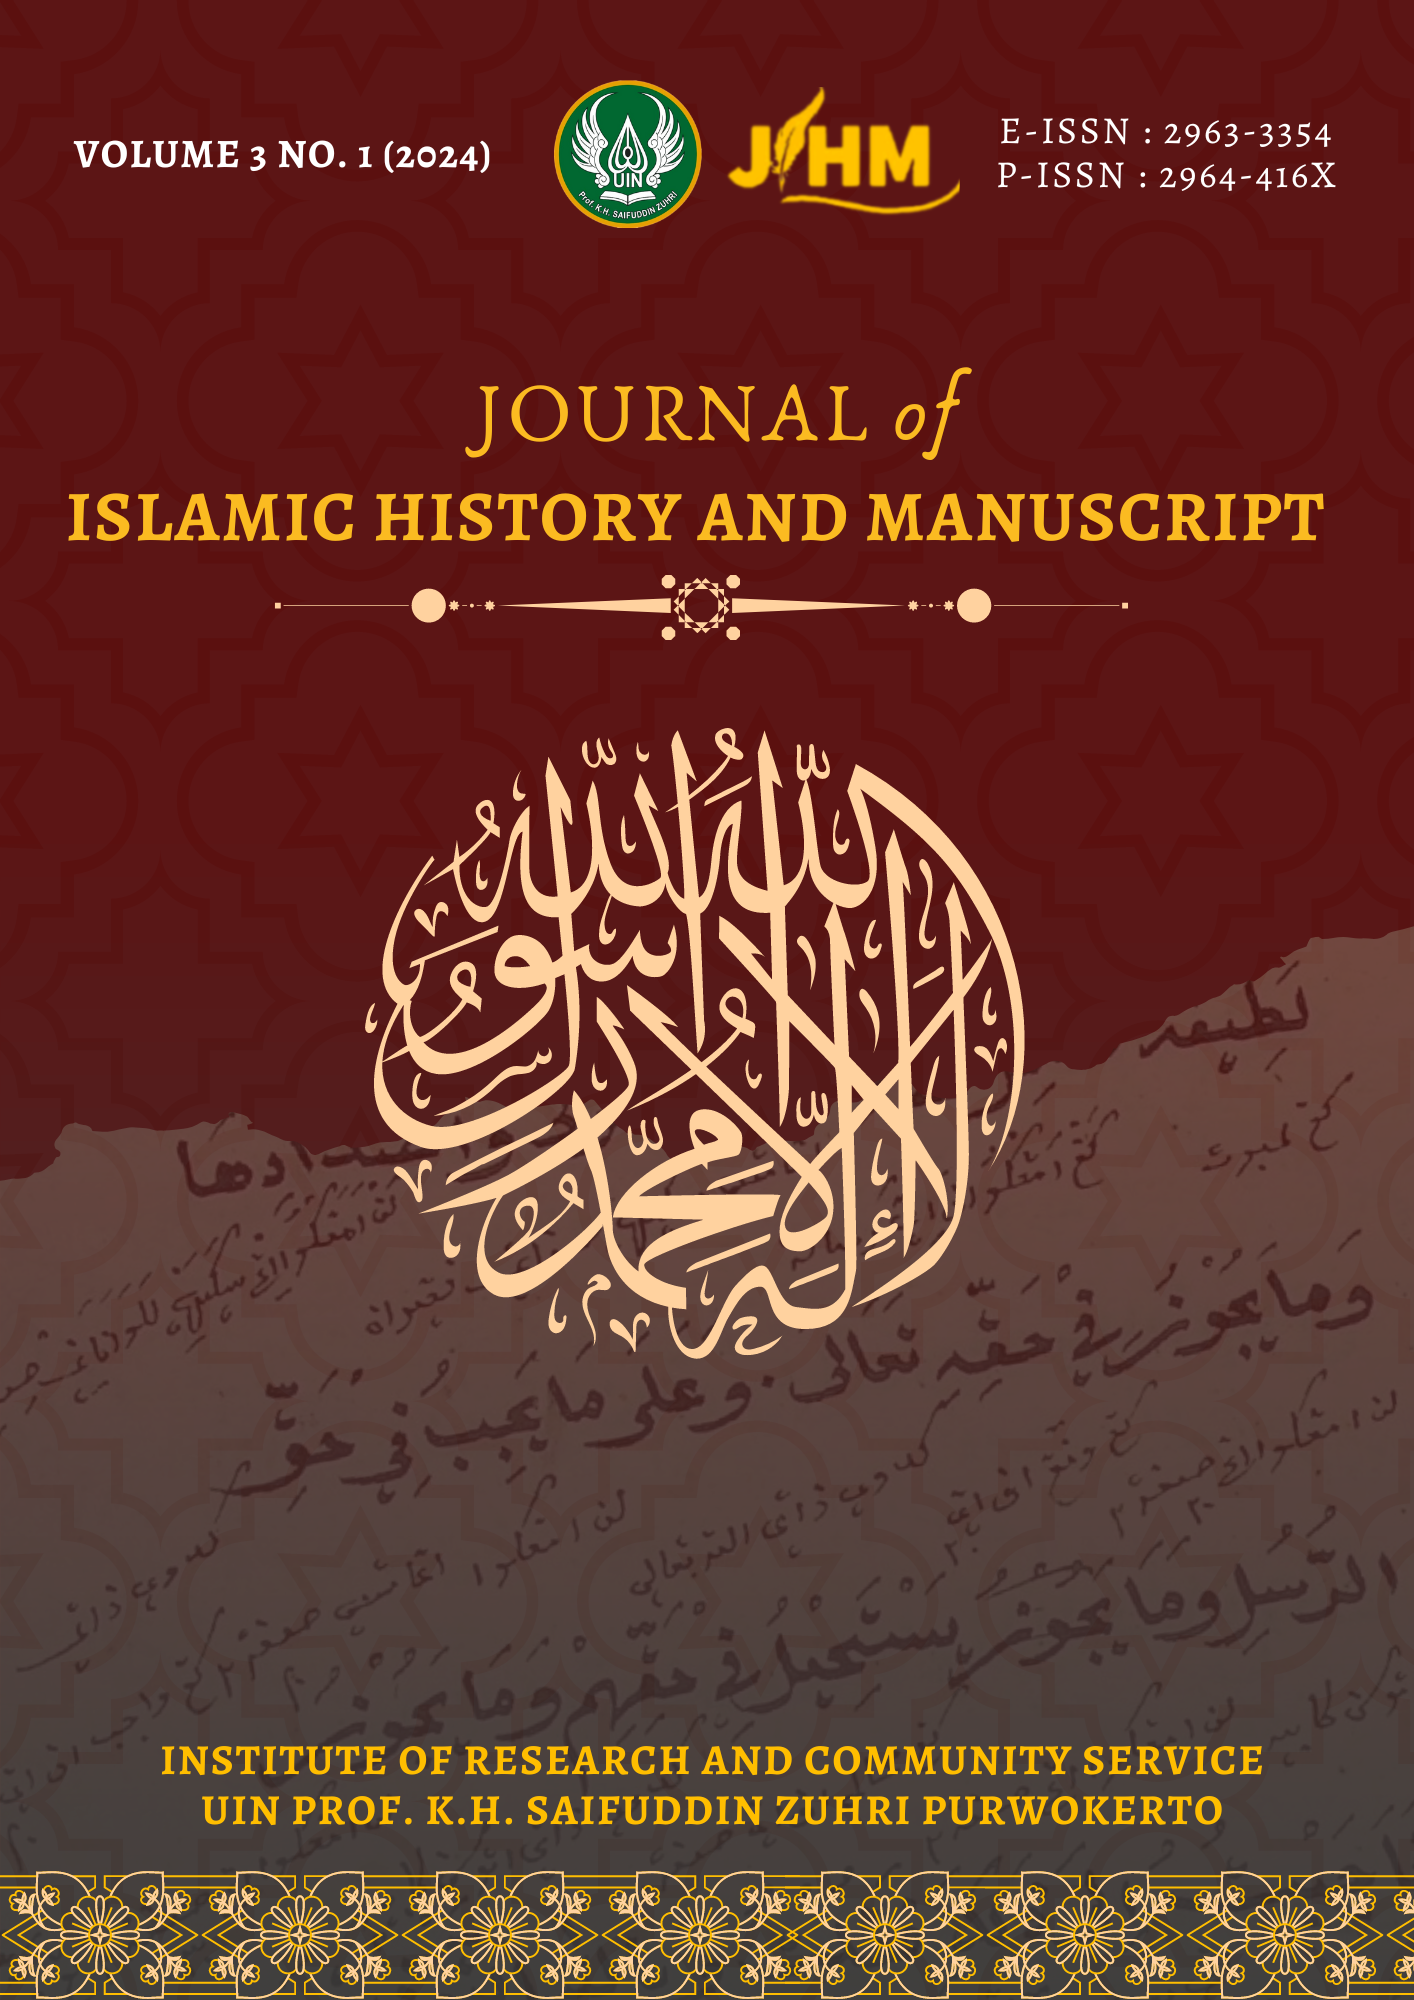 					View Vol. 3 No. 1 (2024): Journal of Islamic History and Manuscript
				